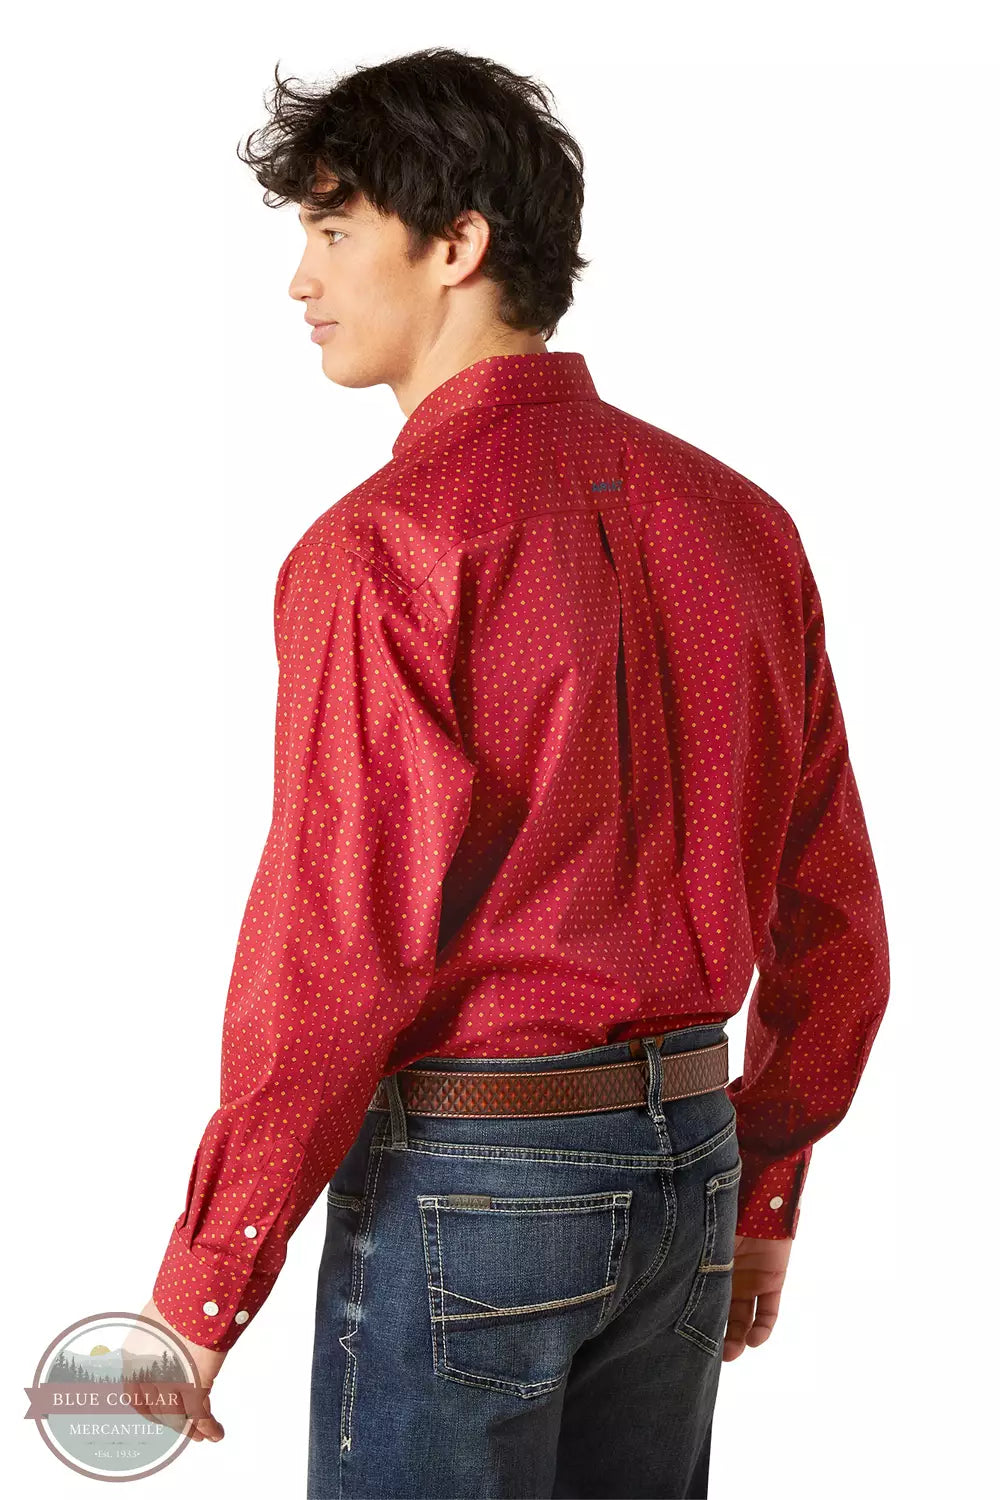 Ariat 10046203 Wrinkle Free Kaisen Classic Fit Long Sleeve Shirt in Biking Red Back View